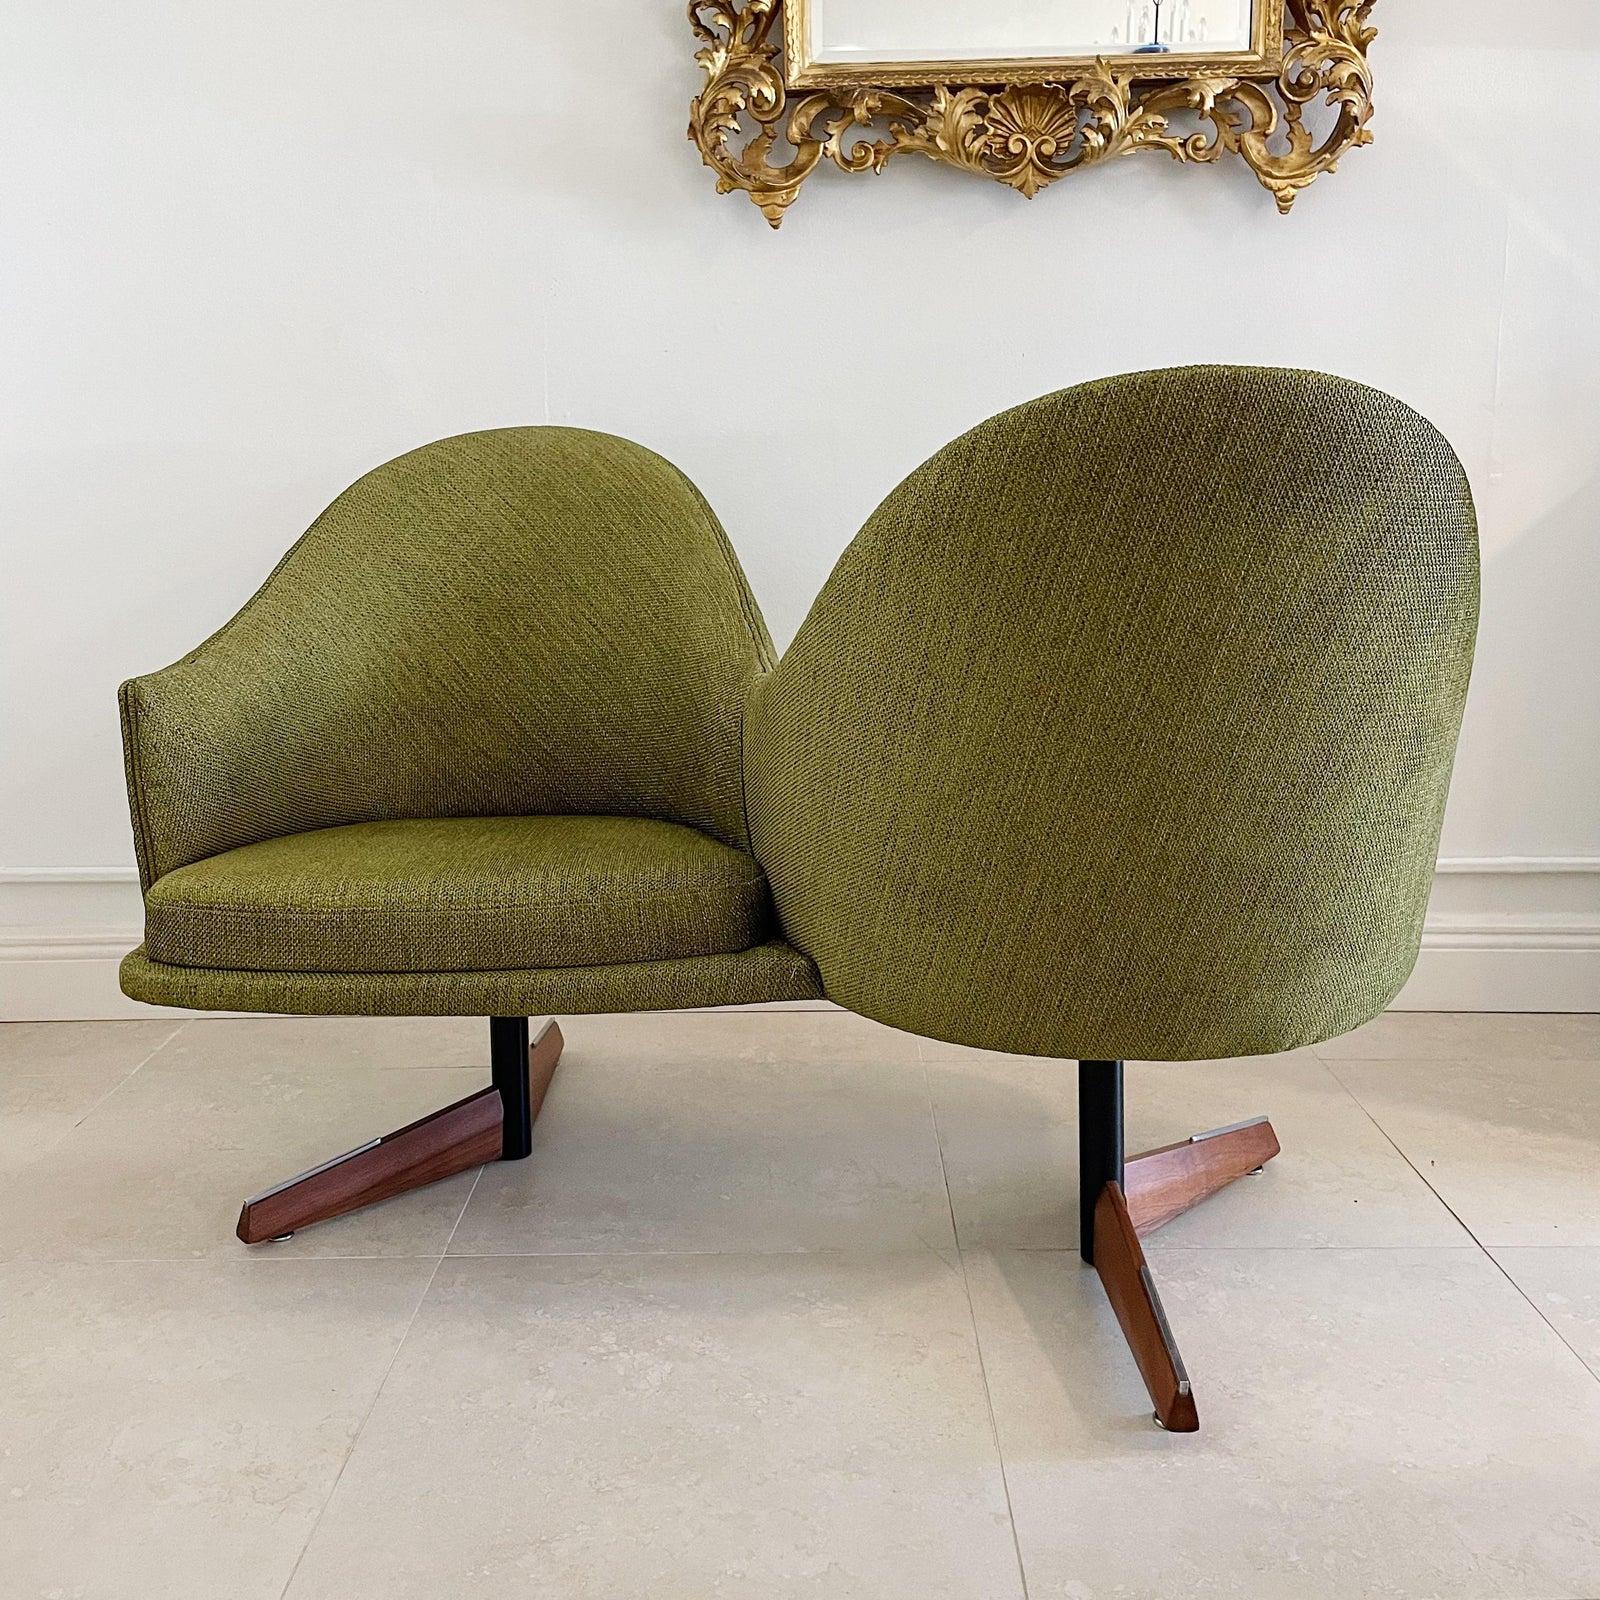 1950's Tete a tete recently upholstered with new foam , fabric and strapping in green Knoll fabric. The base has been powder coated and the wood refinished so fully restored to original like new condition. Maker unknown.